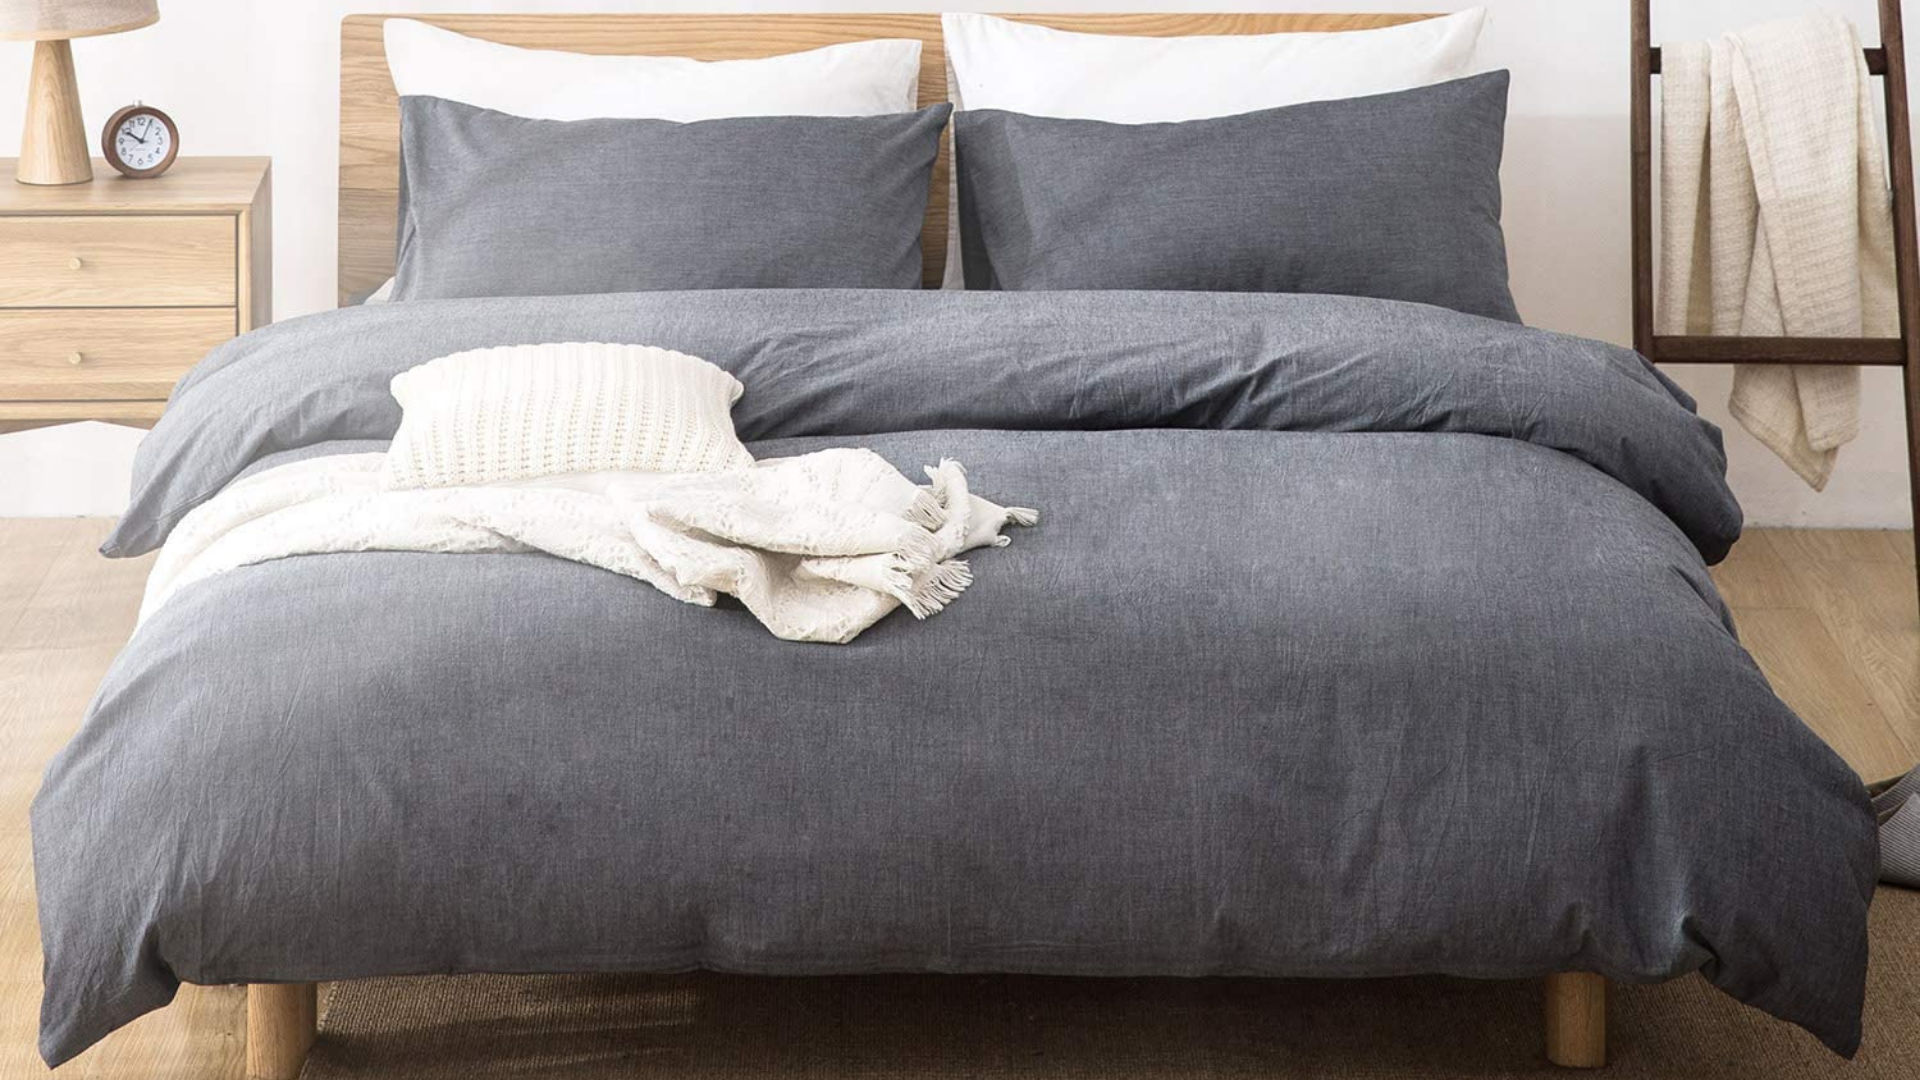 11 Best Comforters For Dog Hair That Are Pet-Friendly